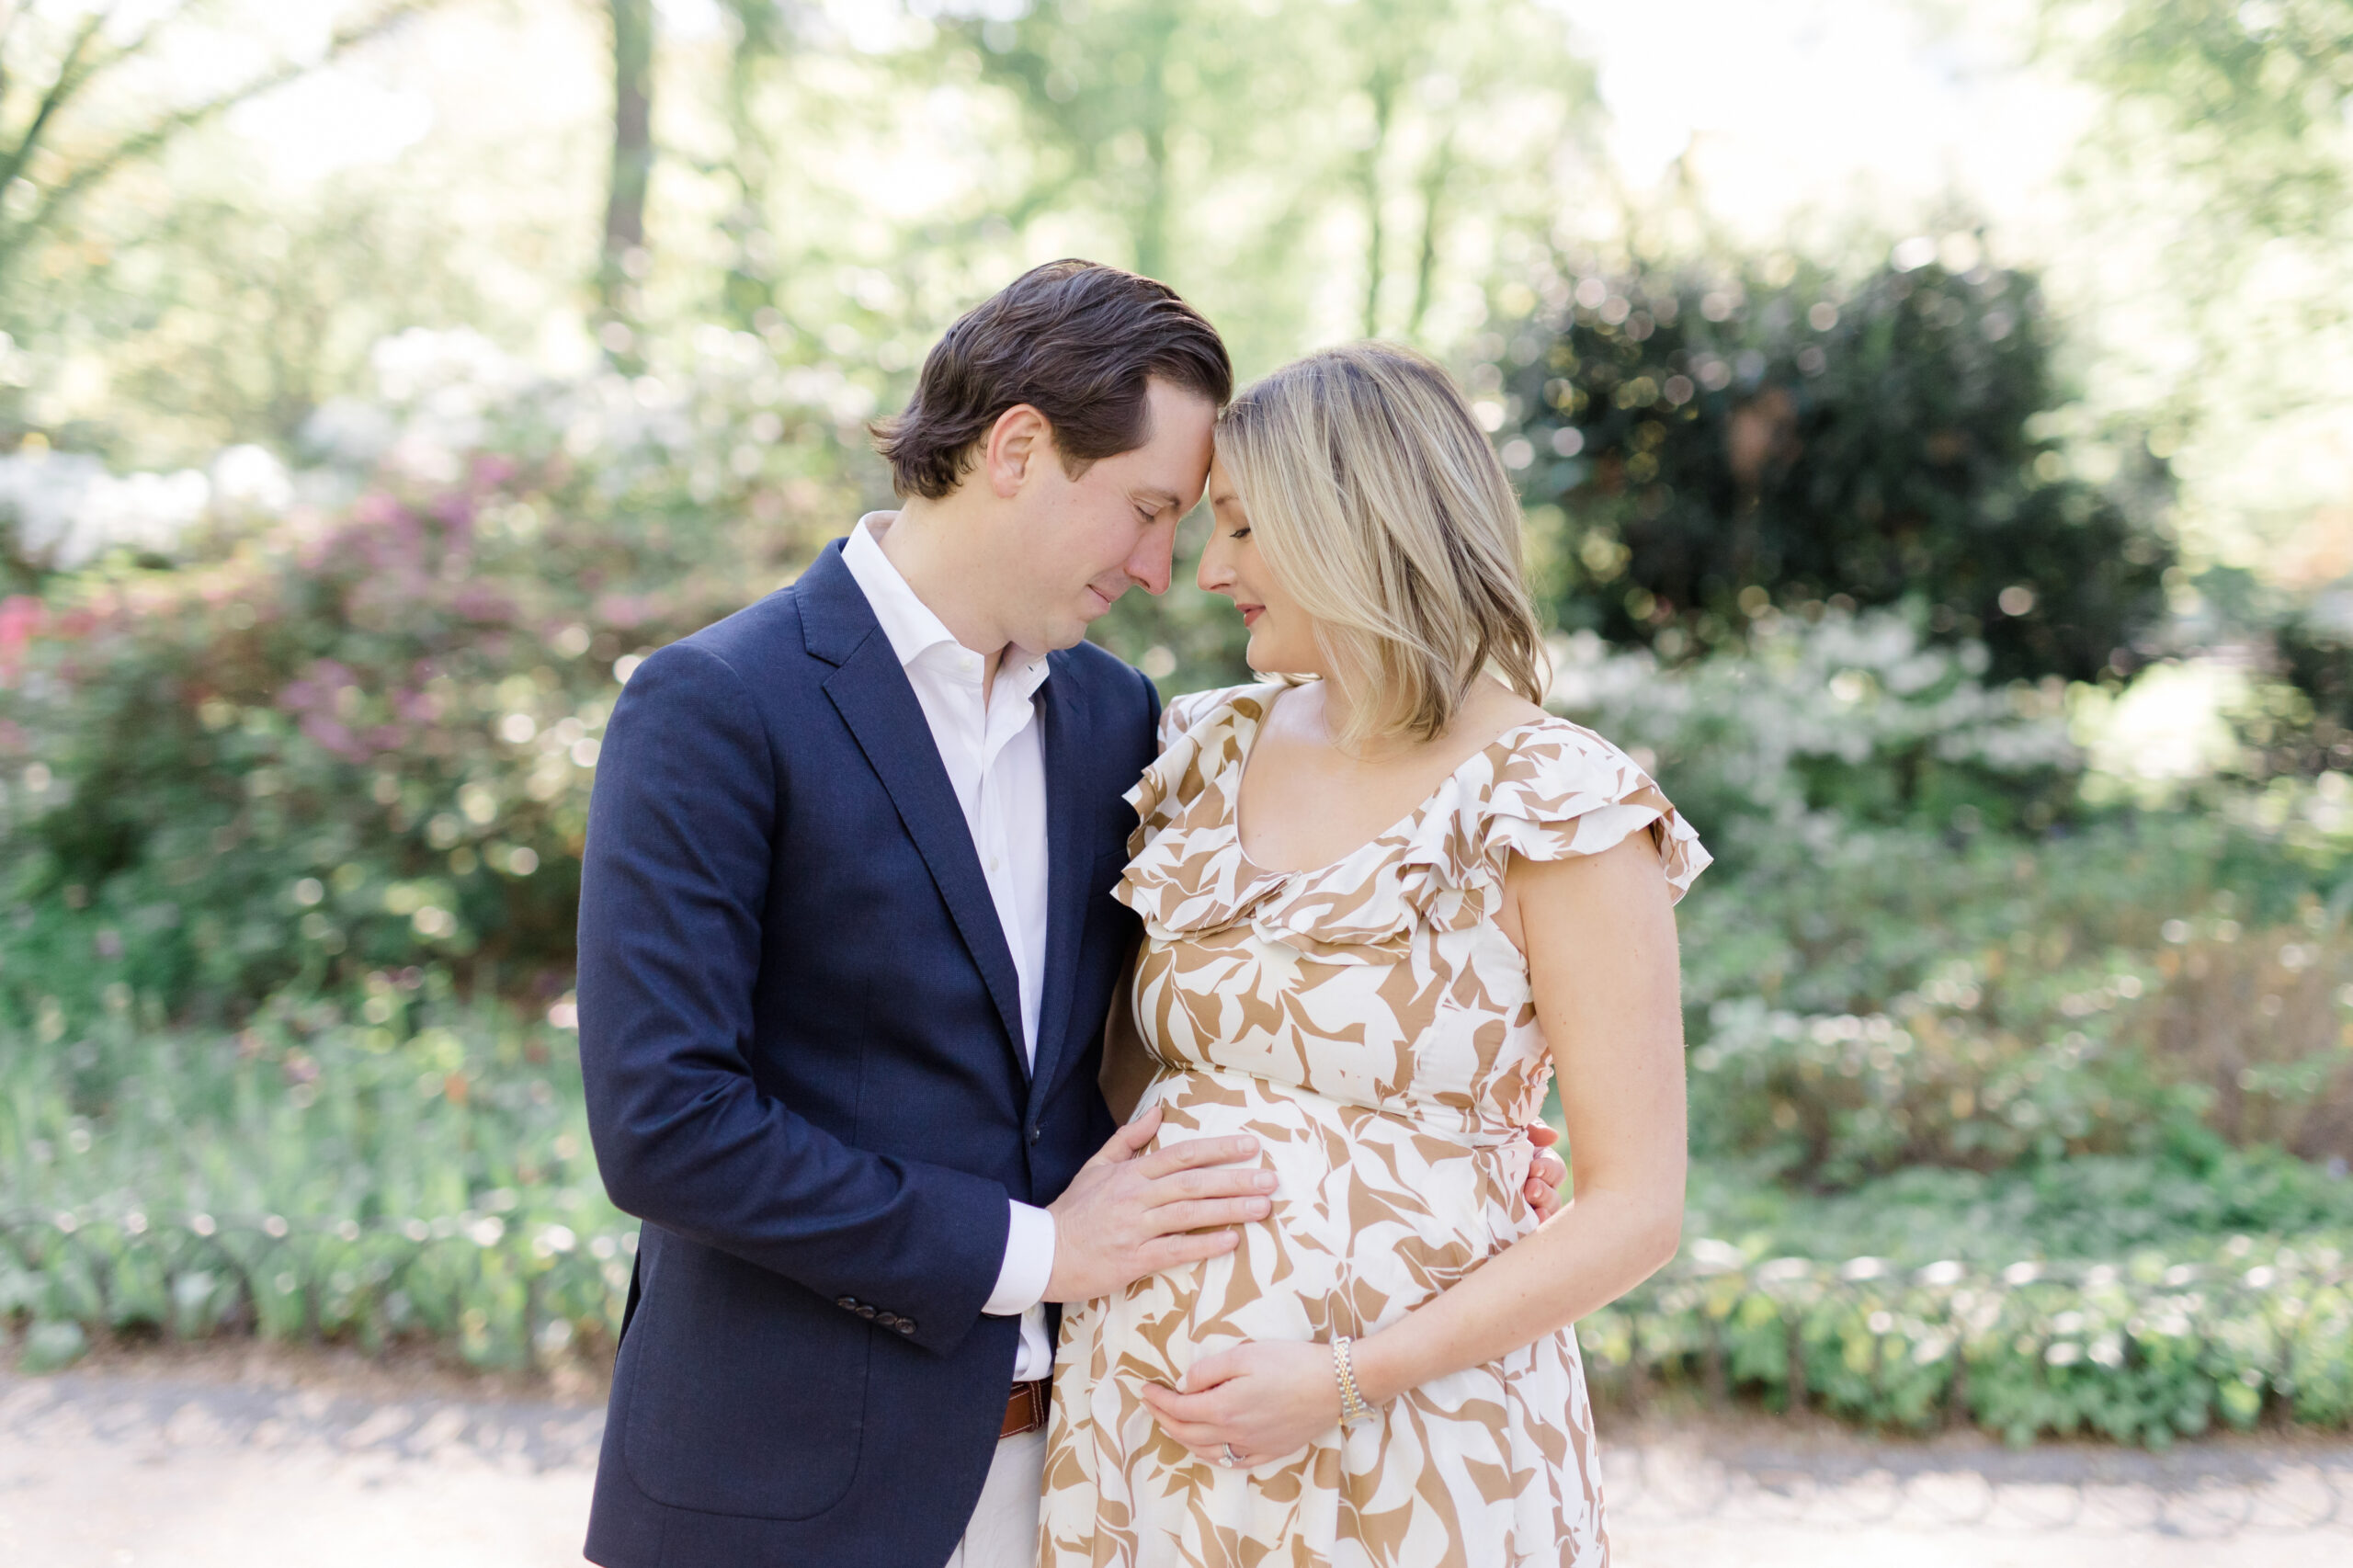 An expecting mom and her husband at a maternity photo session in Central Park shot by Jacqueline Clair Photography